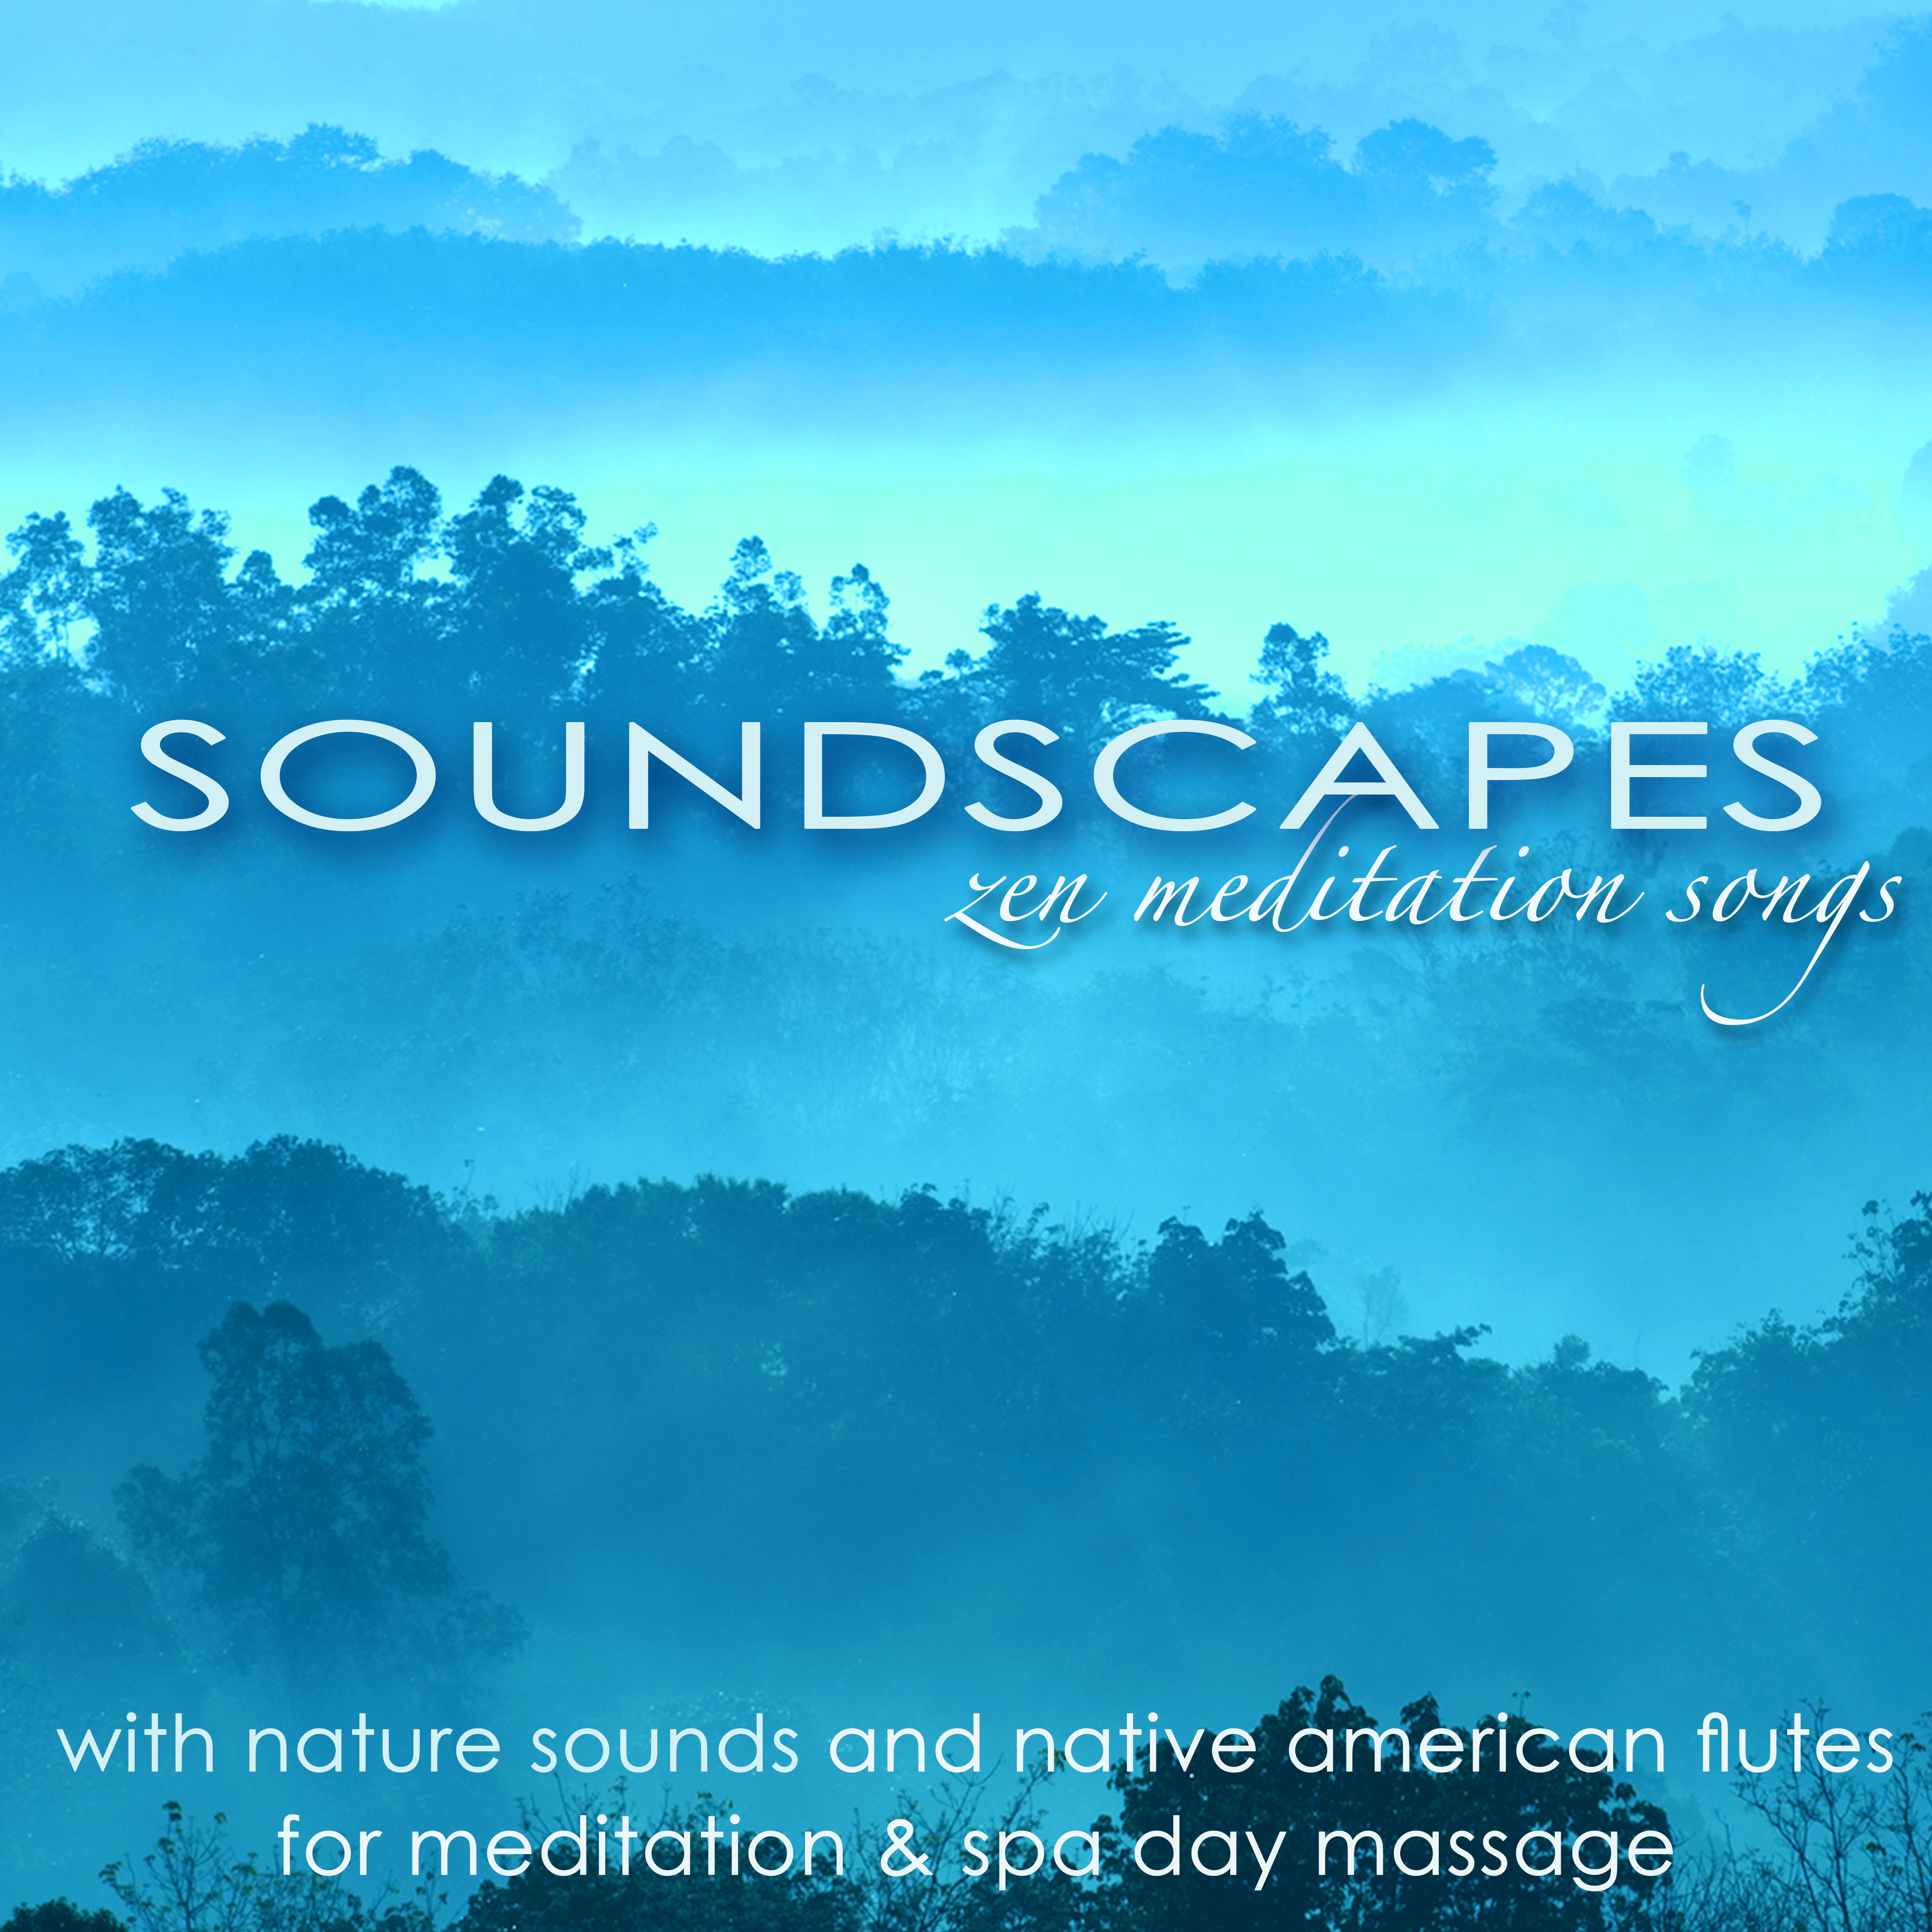 Soundscapes  Zen Meditation Songs with Nature Sounds and Native American Flutes for Meditation  Spa Day Massage